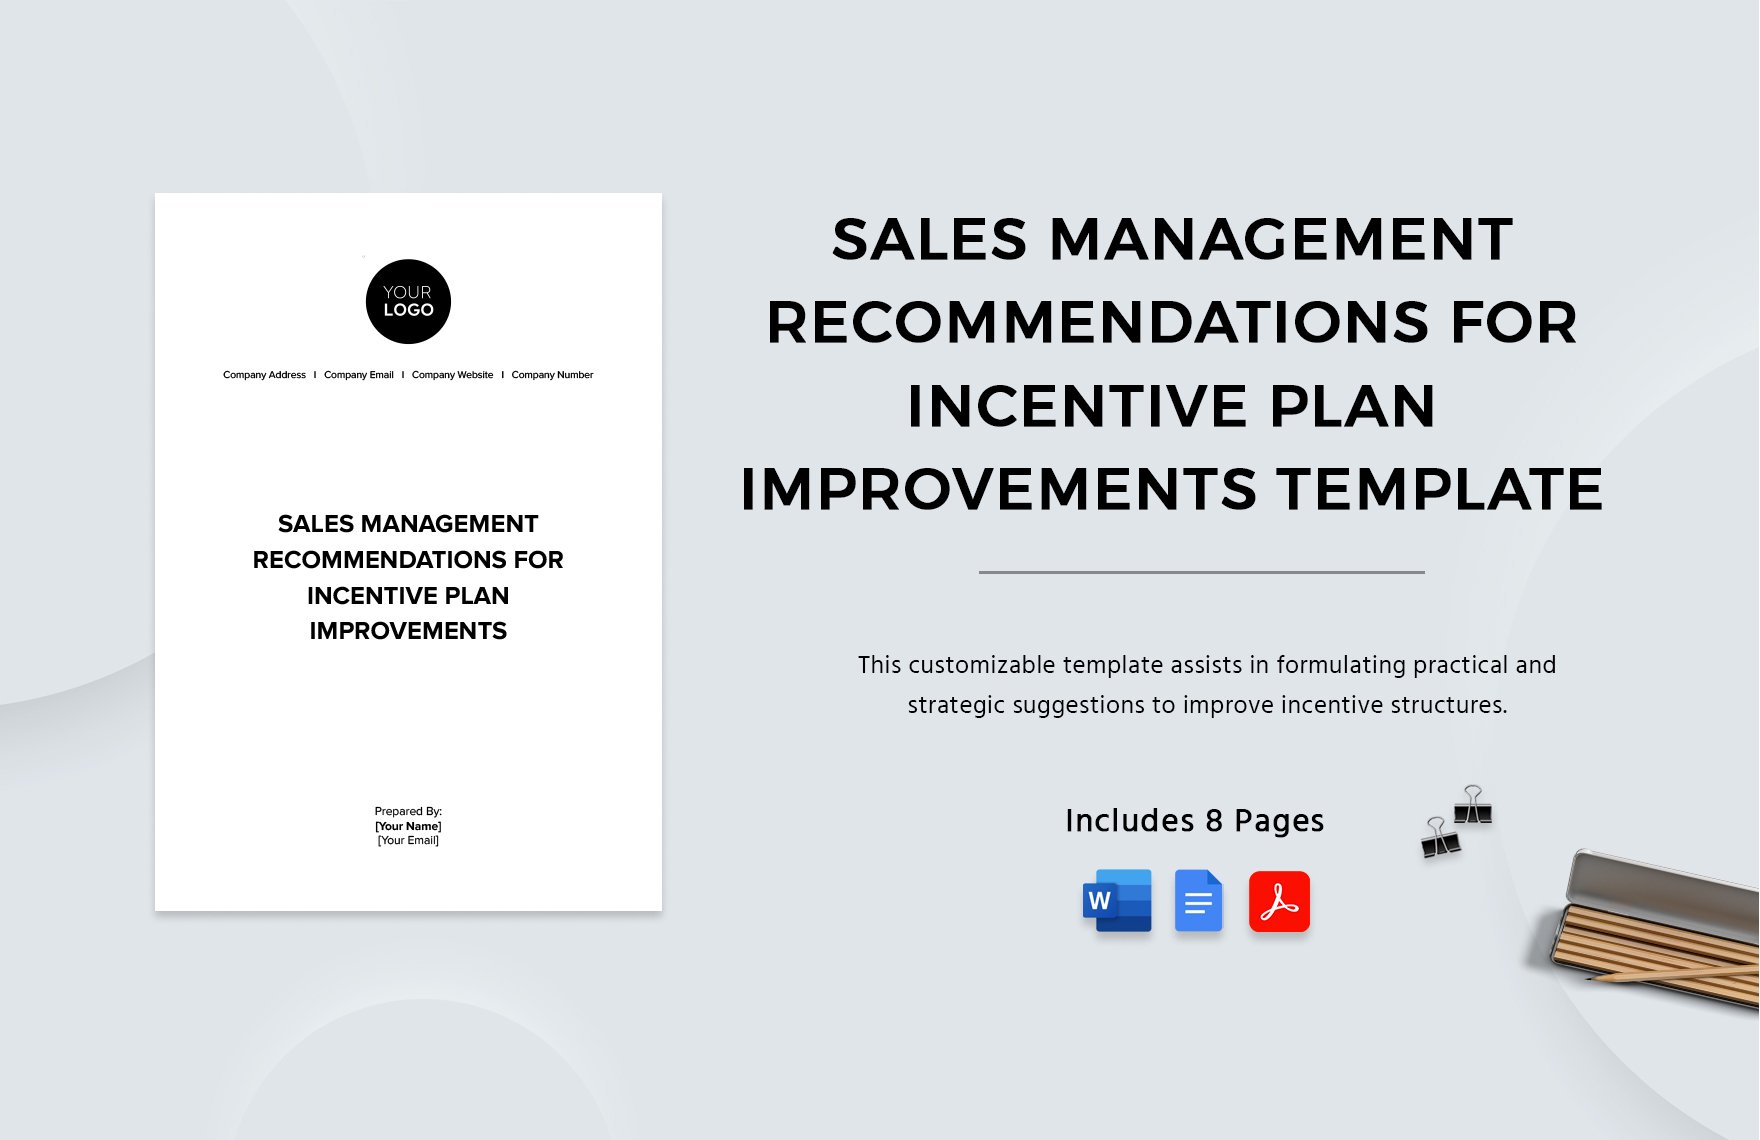 Sales Management Recommendations for Incentive Plan Improvements Template